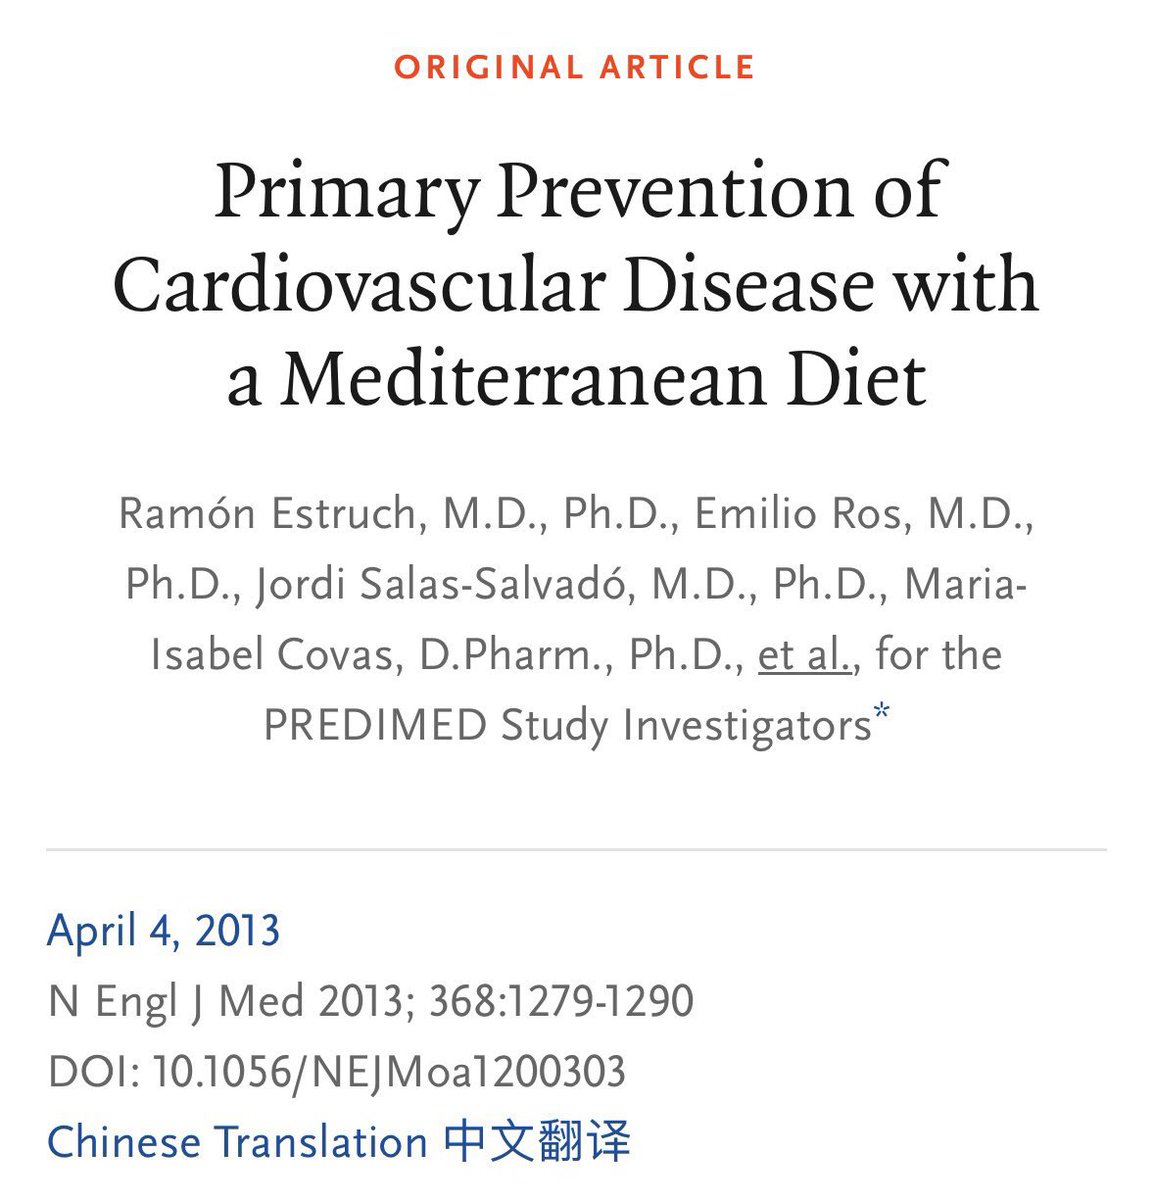 Mediterranean diet for primary prevention of cardiovascular disease? A diet rich in fruits/legumes/nuts/olive oil, with CV benefit demonstrable against a low fat diet in this landmark trial. PREDIMED Trial, NEJM 2013 ♥️